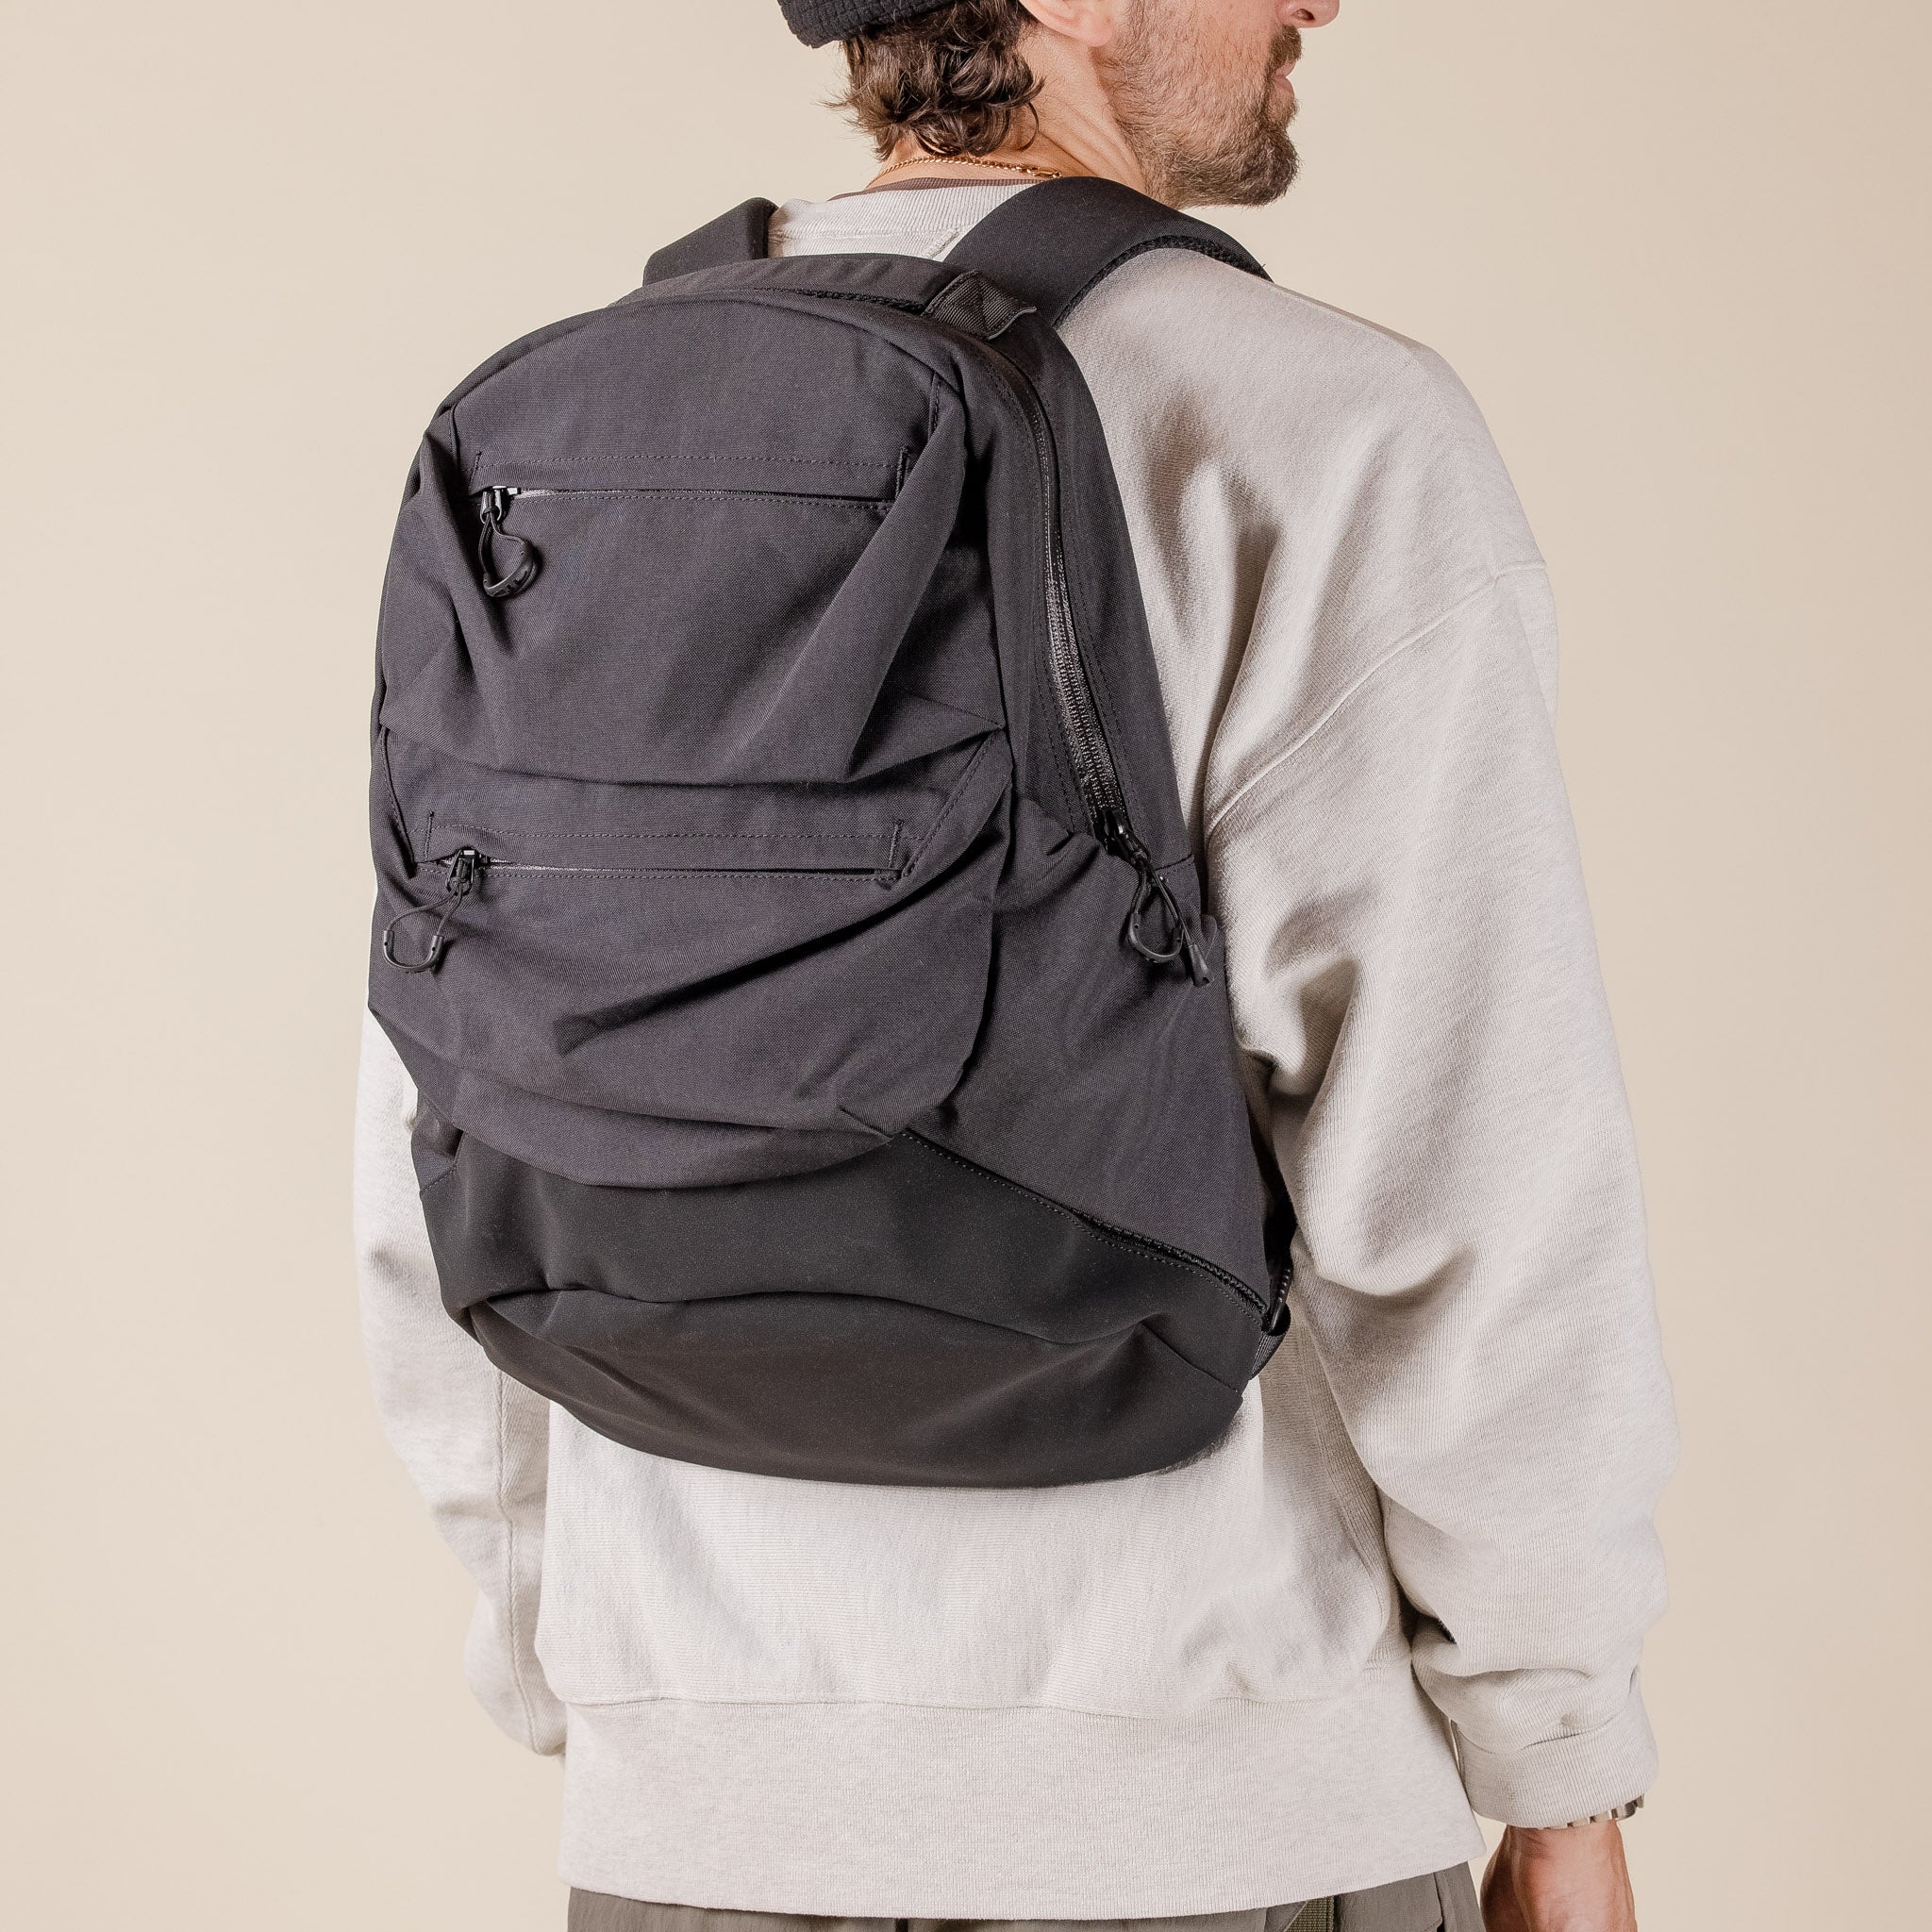 CMF Comfy Outdoor Garment - Organize Backpack - Black "cmf outdoor garment stockist" "cmf Japan" "lost hills store Japan" "comfy outdoor garment stockist"